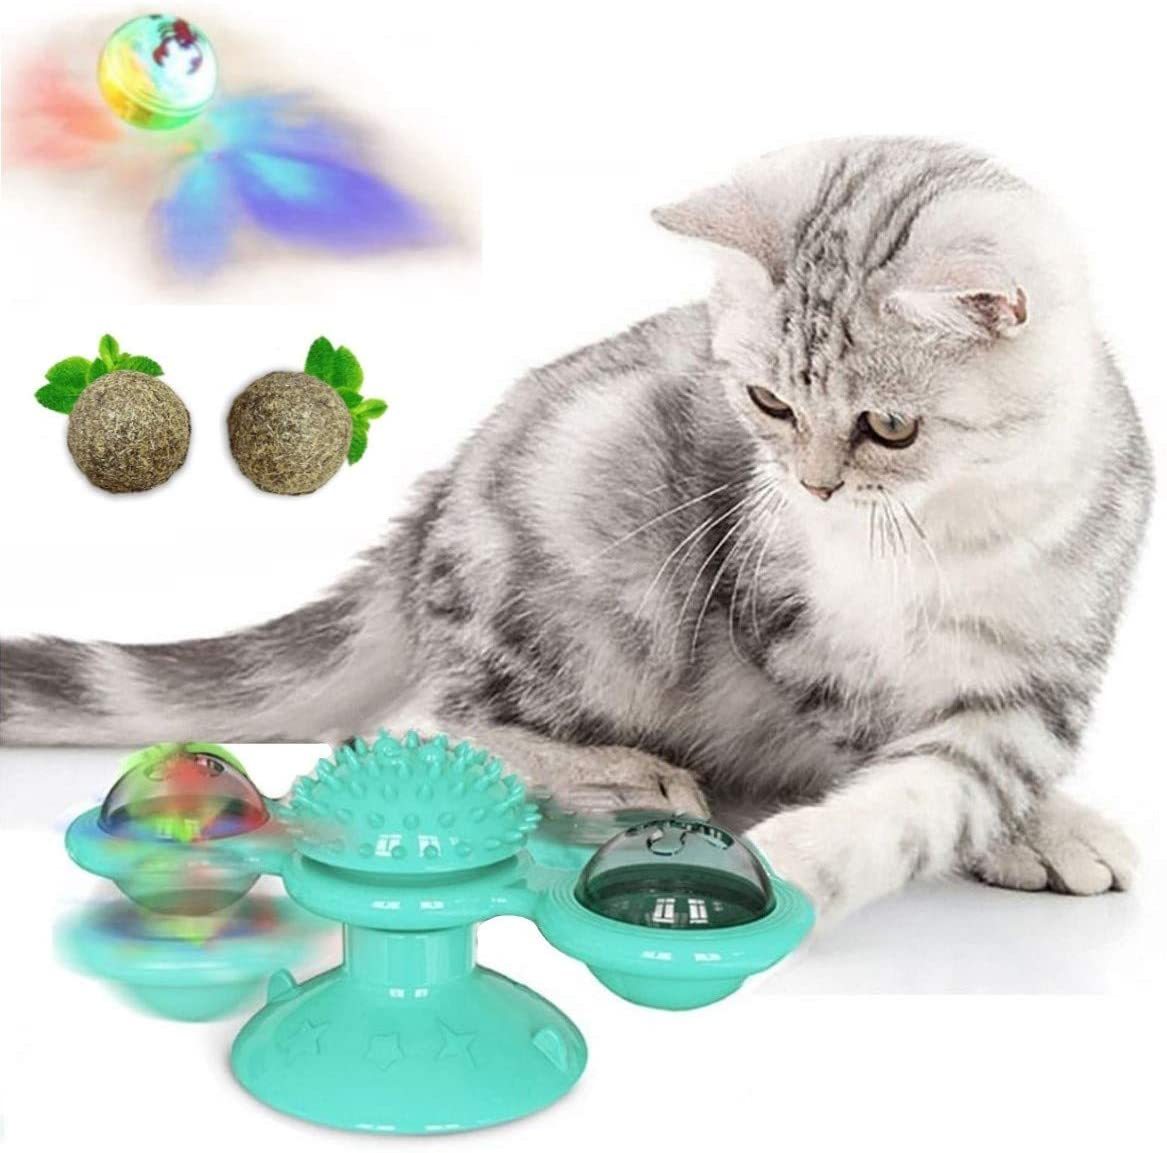 Cat-Funny-Toy-Multifunction-Windmill-Turntable-Massage-Tickle-Toy-Hair-Brush-Pet-Interactive-Game-wi-1865369-12